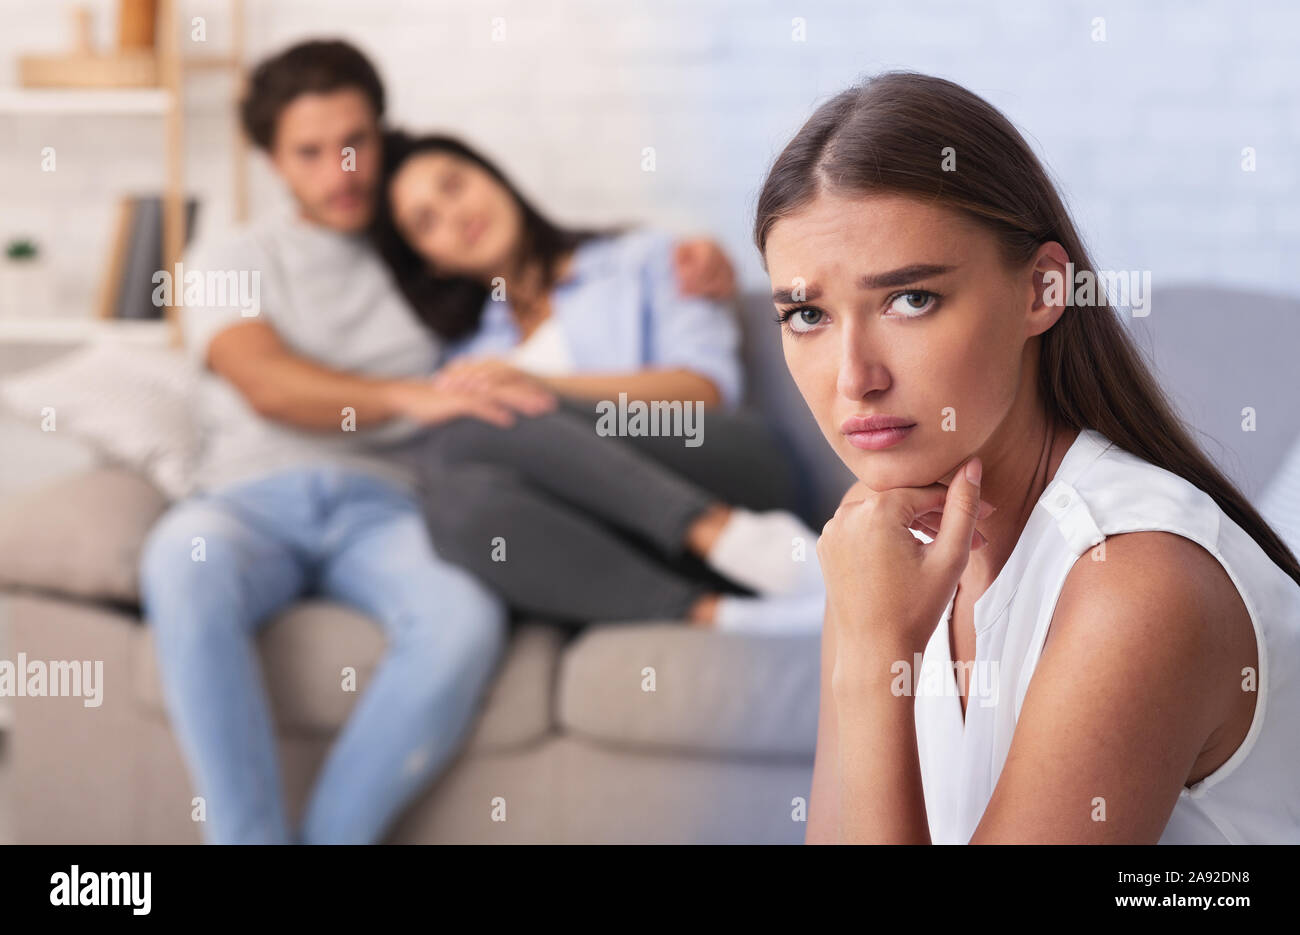 Sad Woman Watching Couple Embracing Sitting On Couch Indoor Stock Photo